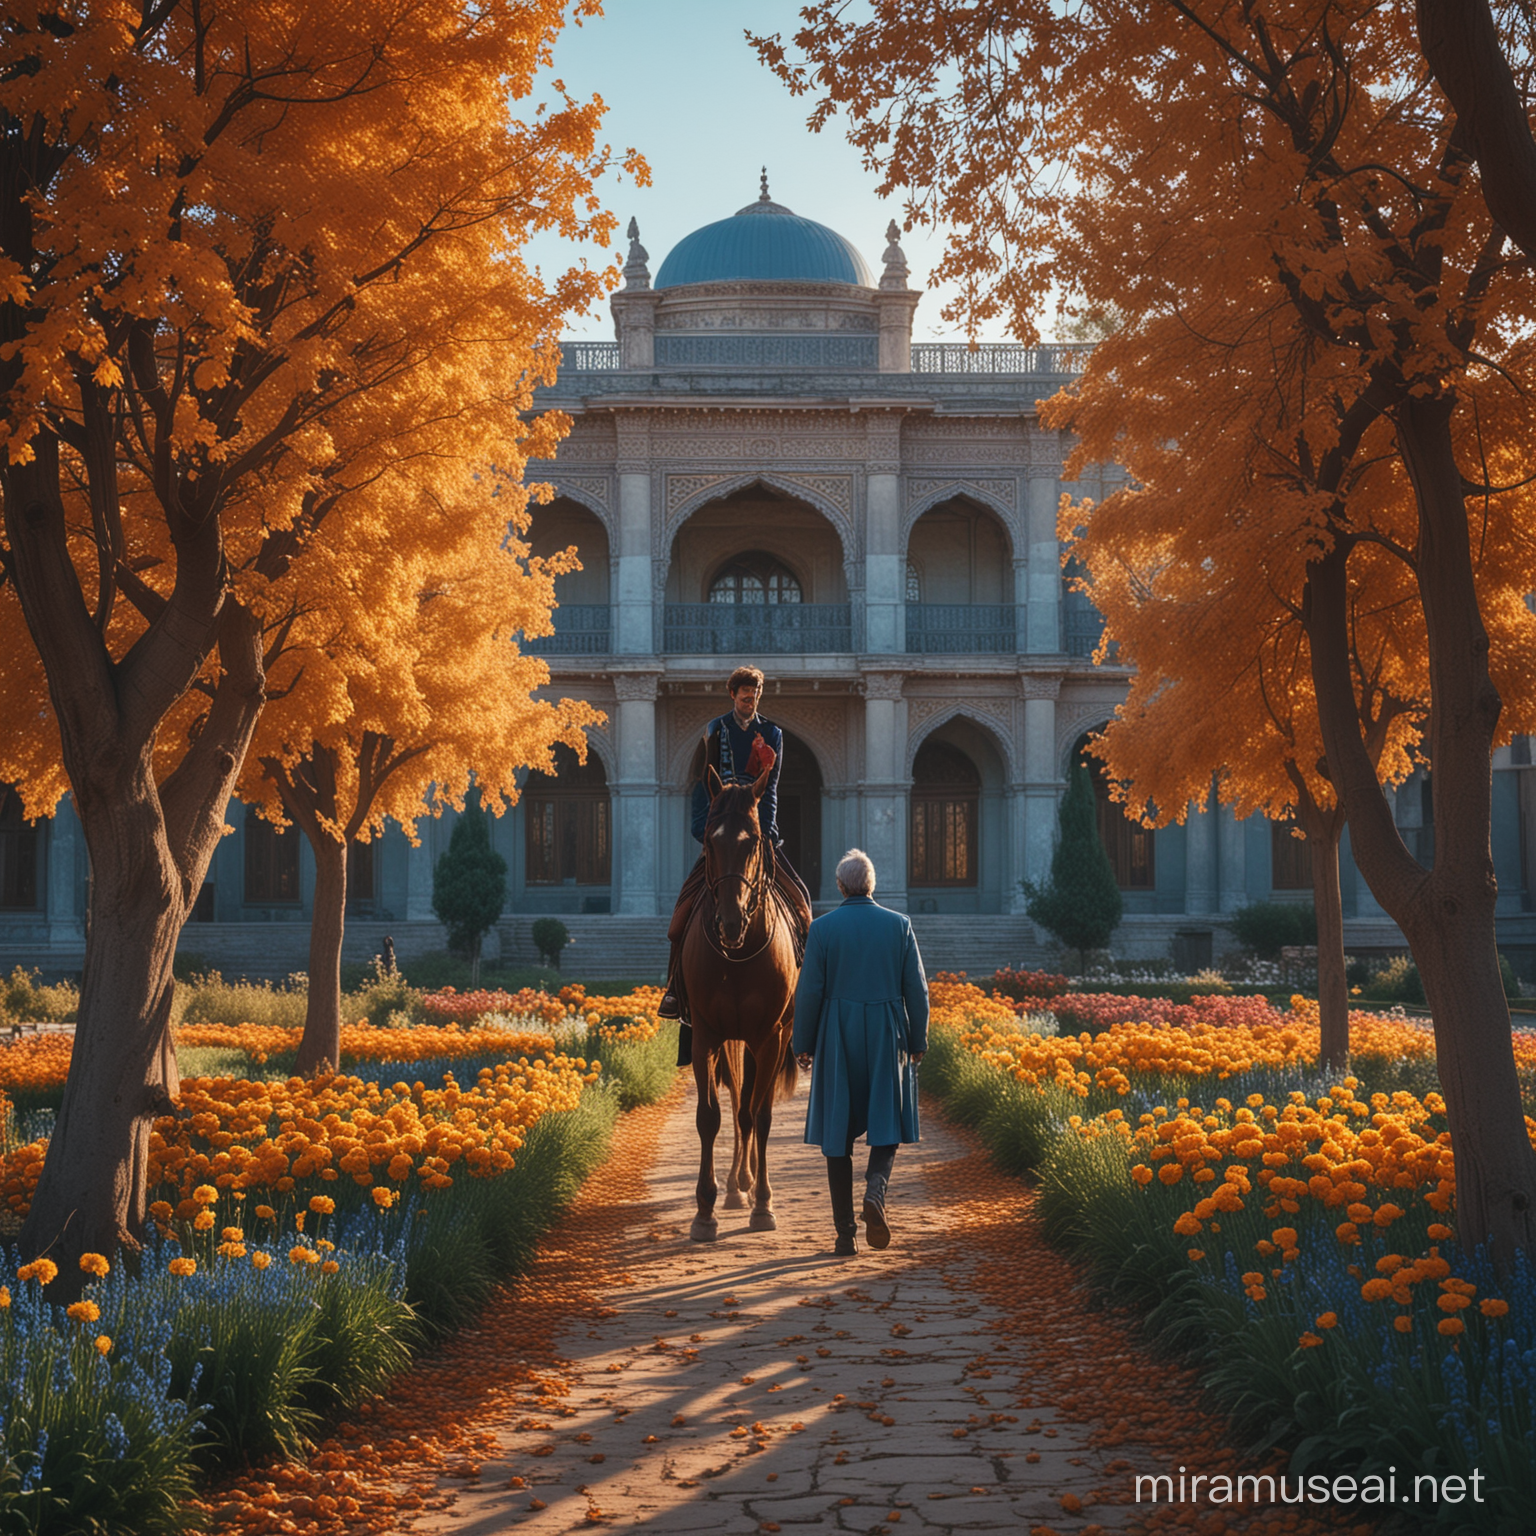 Old palace-autumn season-blue color theme-sunset-flower garden-prince walking with his horse-feeling of peace-cinematic-old-real-Trees-people-flowers are real-Persian architecture